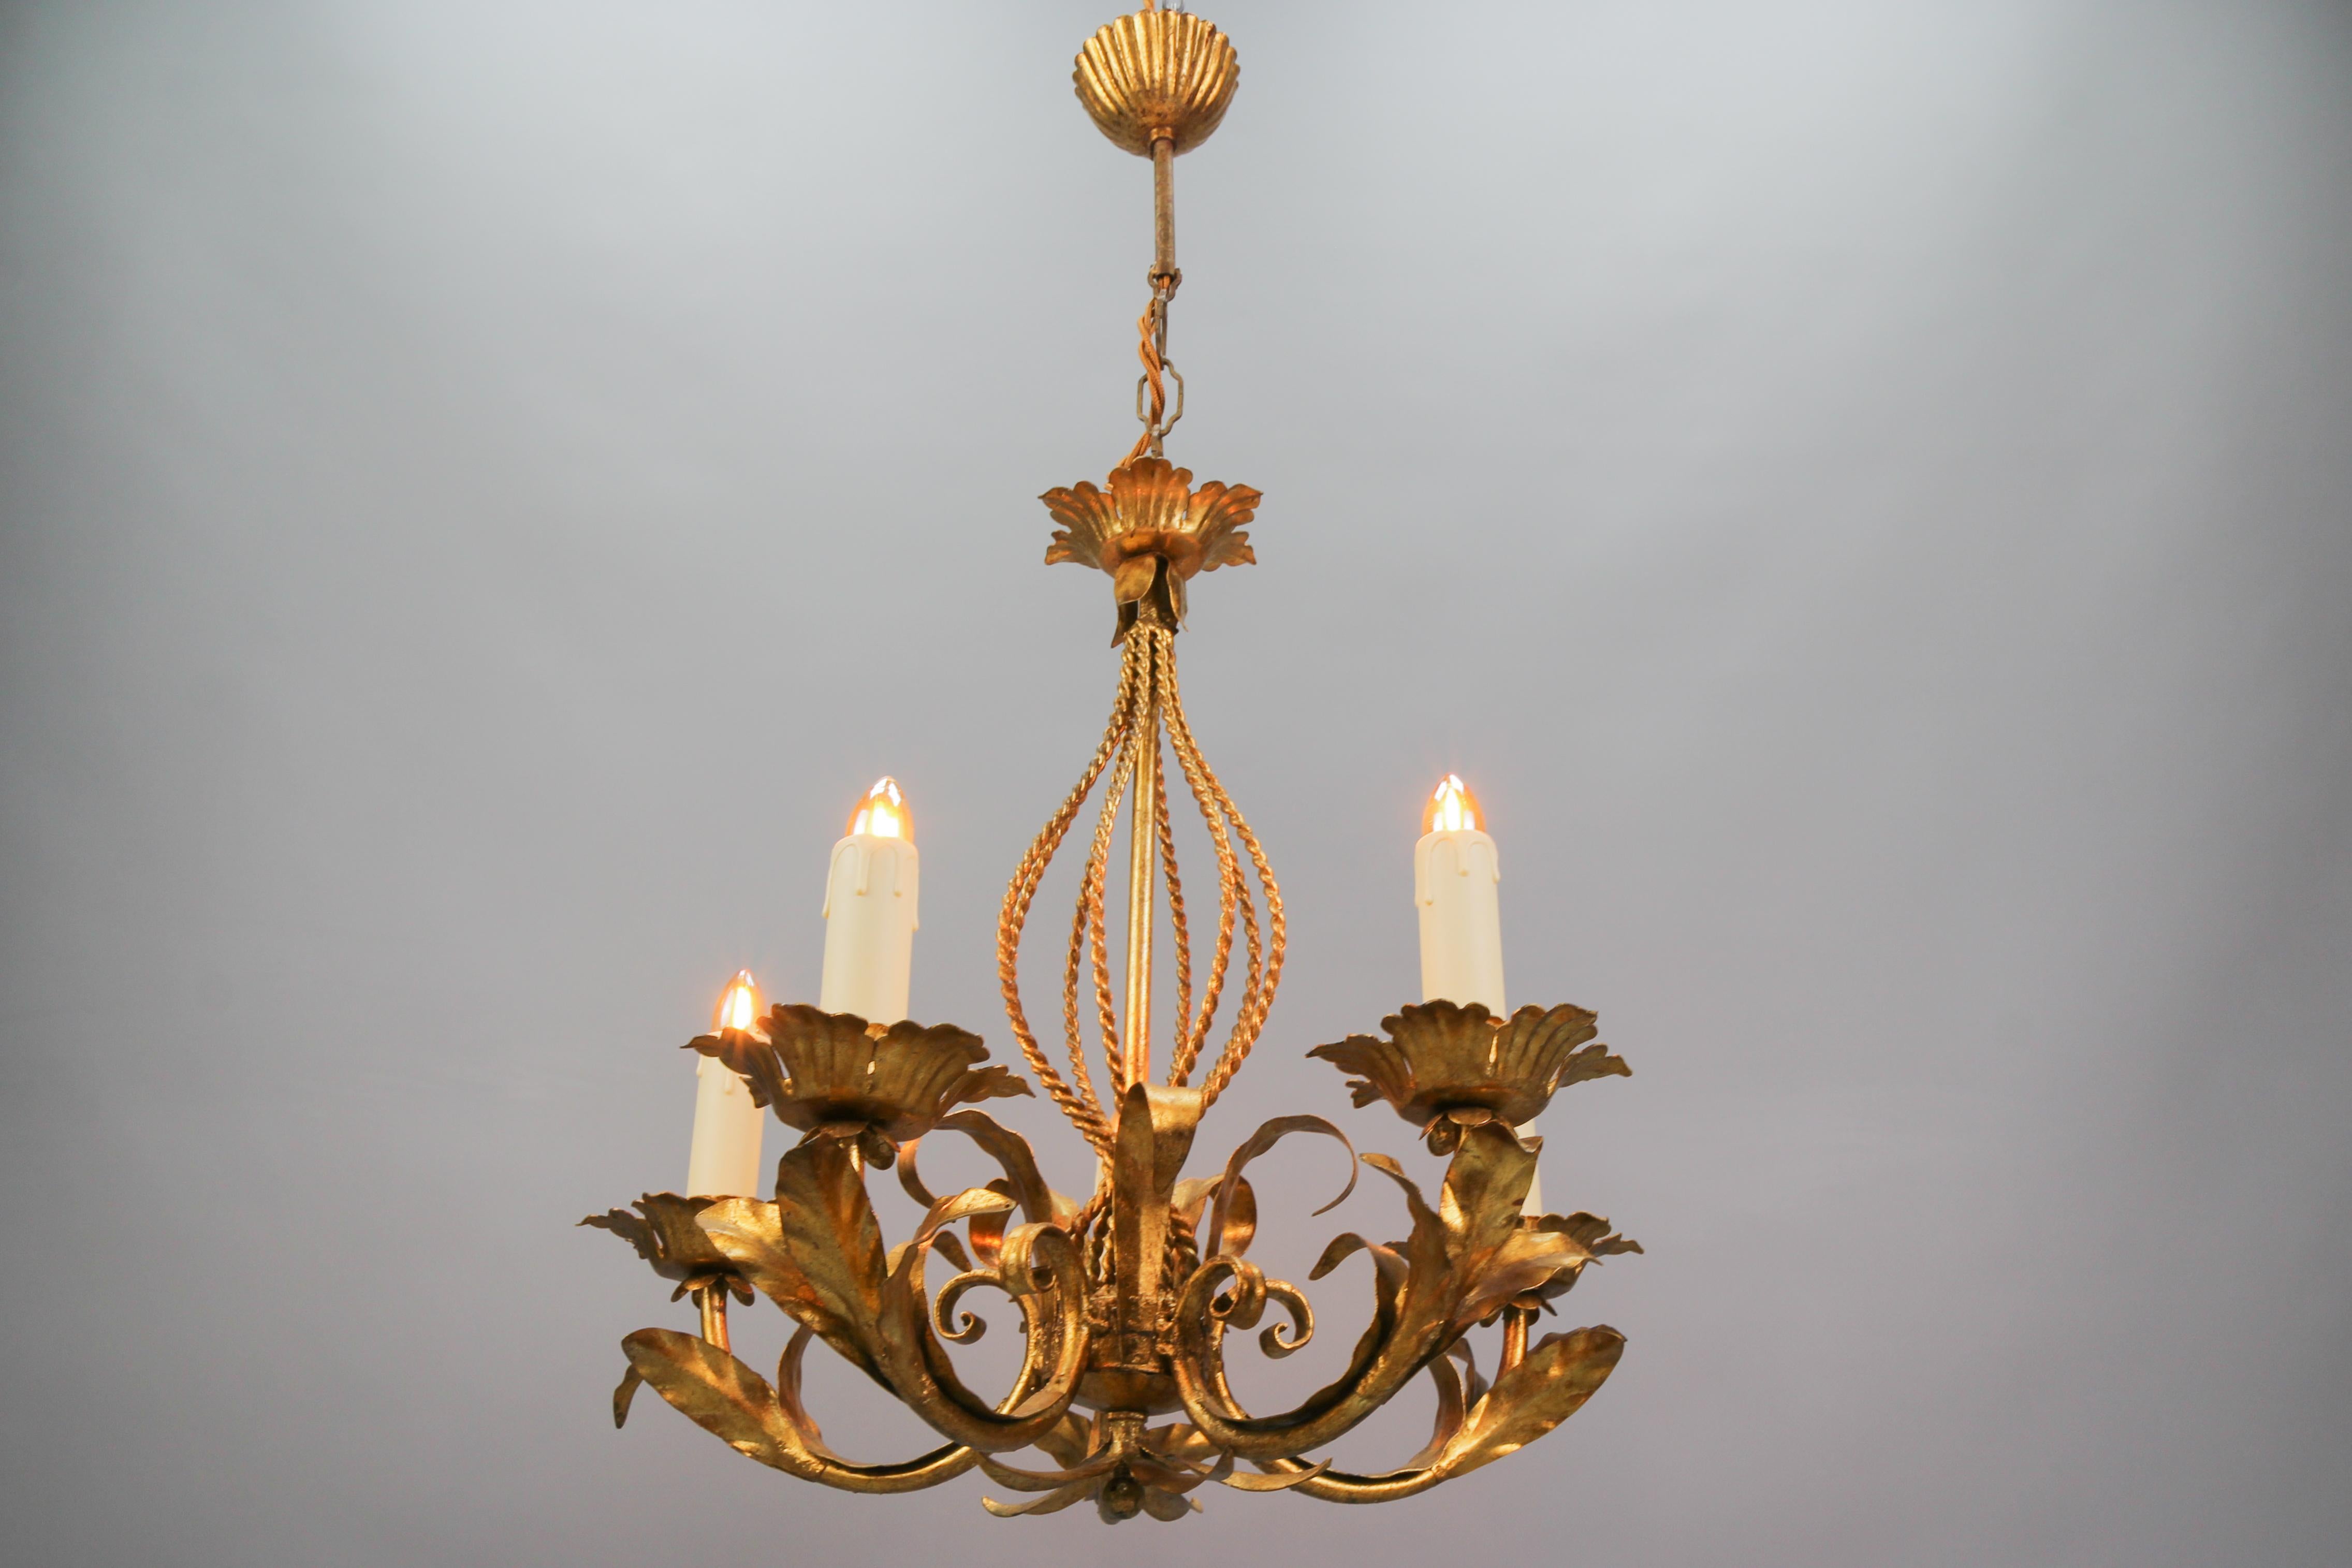 Italian Hollywood Regency style gilt metal five-light chandelier, circa the 1970s
A beautiful Italian gilt metal/toleware five-light chandelier from the circa 1970s. The golden light fixture is adorned with leaves and beautifully shaped ropes on